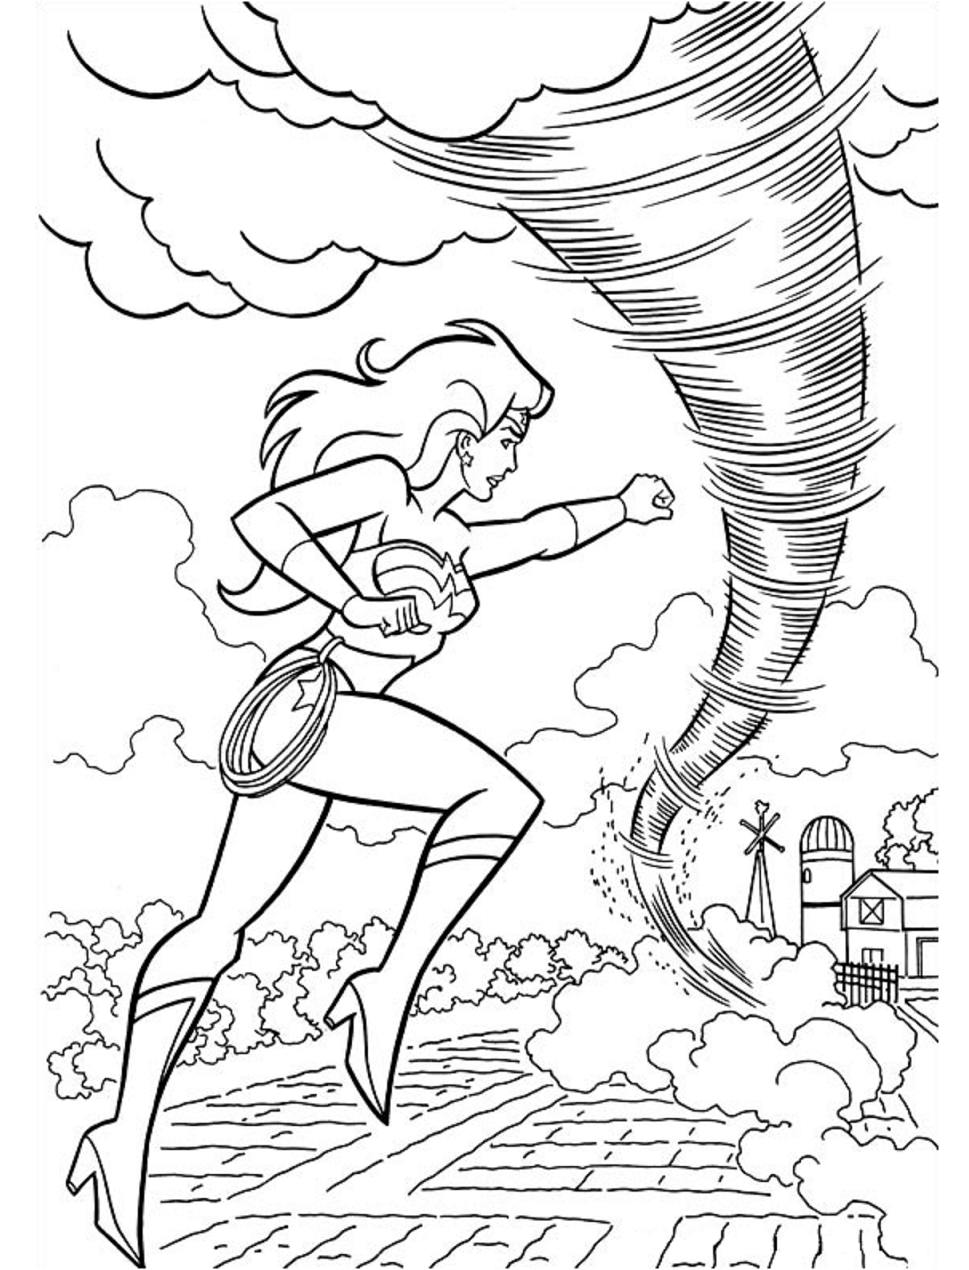 Wonder Woman With Tornado Coloring Page